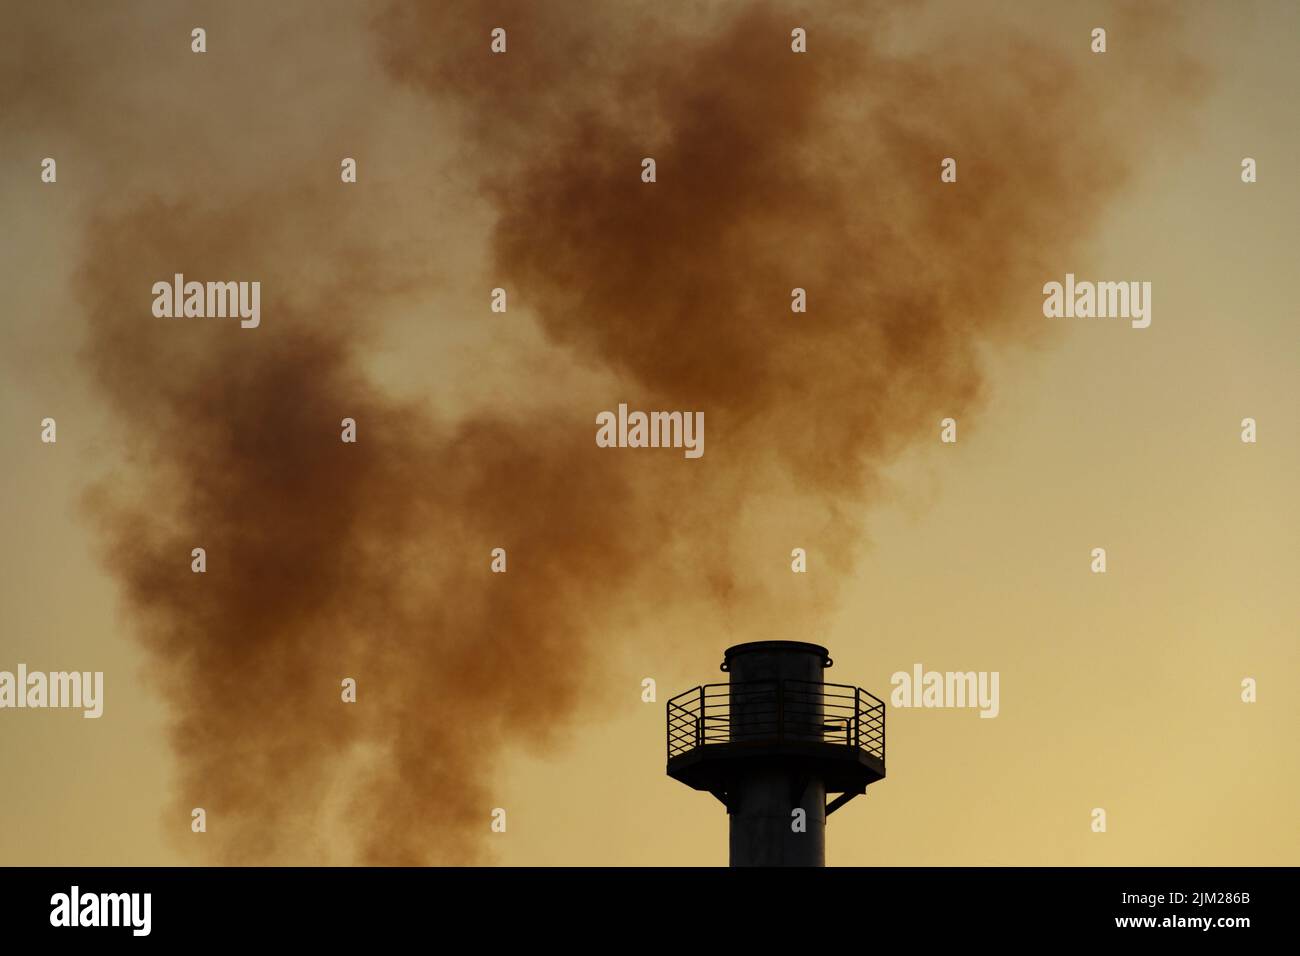 Goiania, Goiás, Brazil – August 04, 2022: Smoke rising from the chimneys of a factory. Factory smoke pollution with the sky in the background. Stock Photo